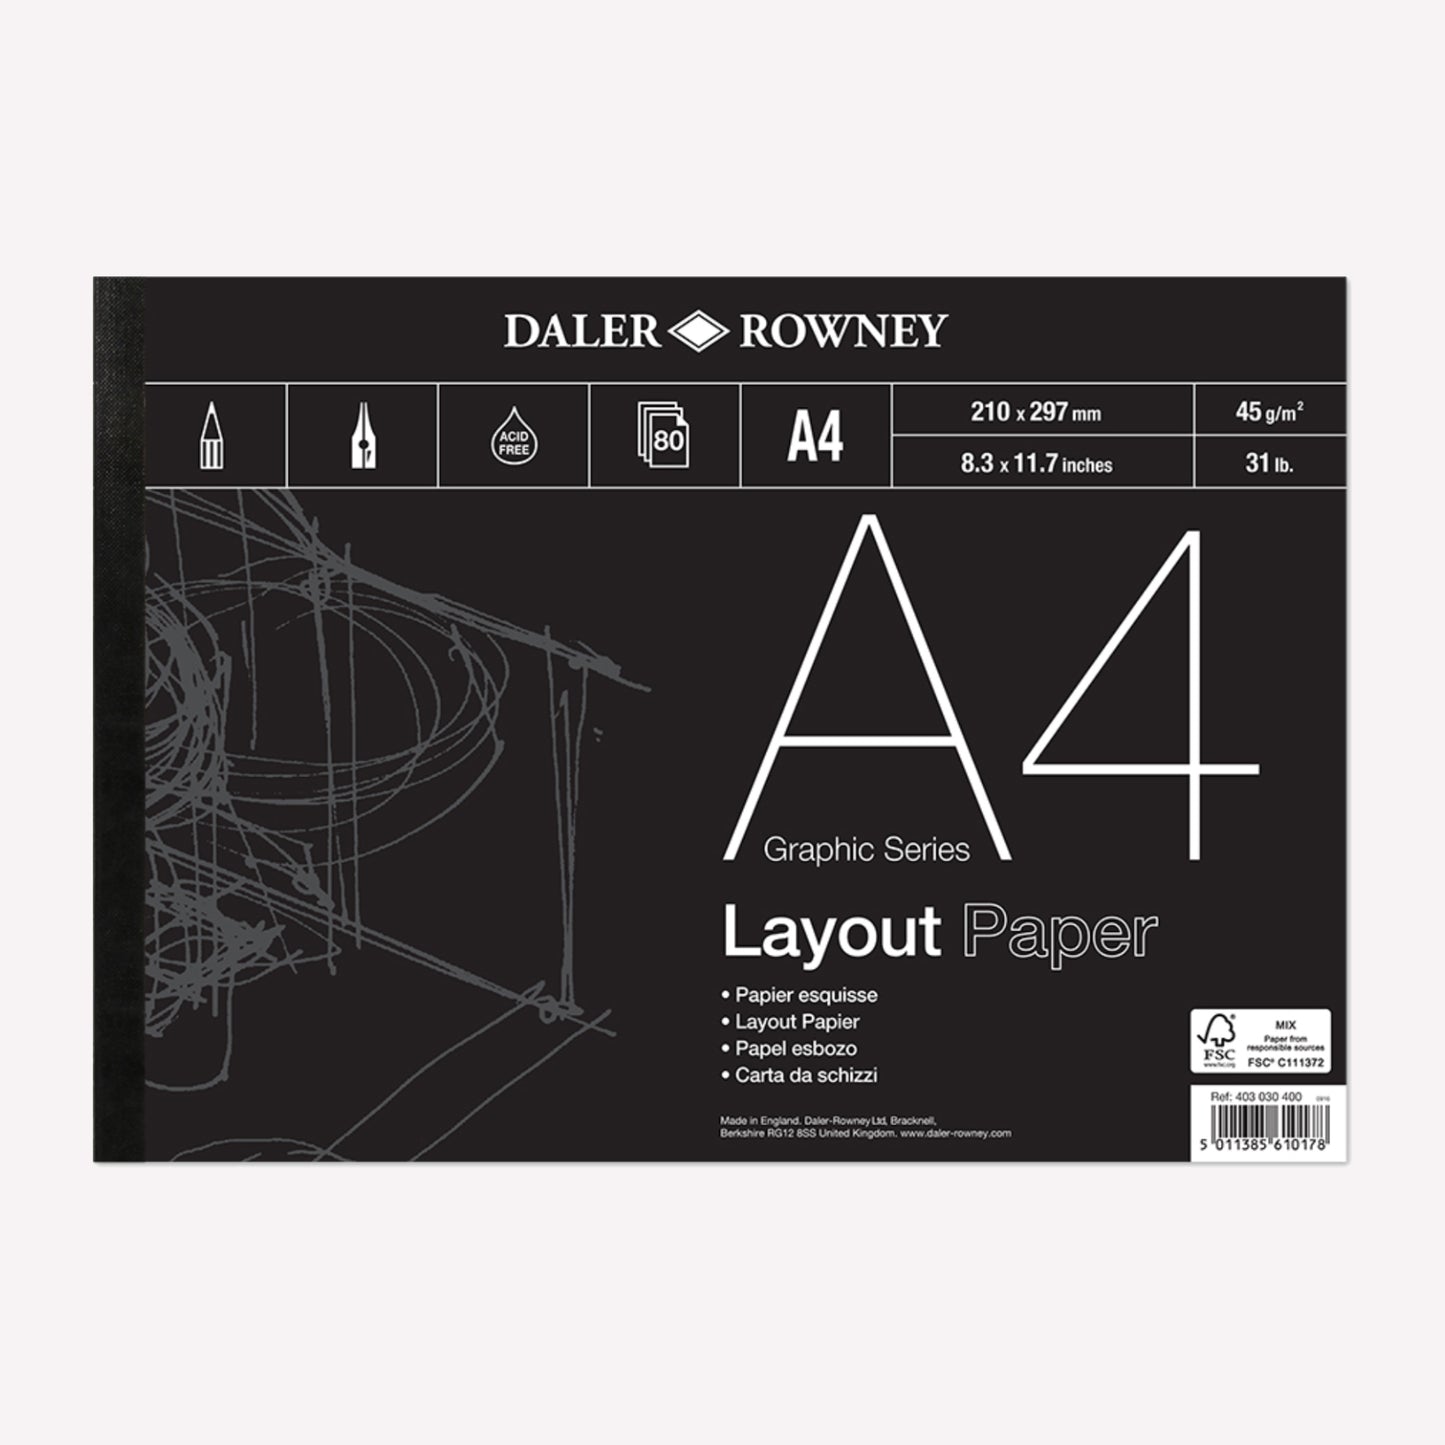 Daler-Rowney's Graphic Series A4 Layout paper with a black cover featuring a rough sketch. 